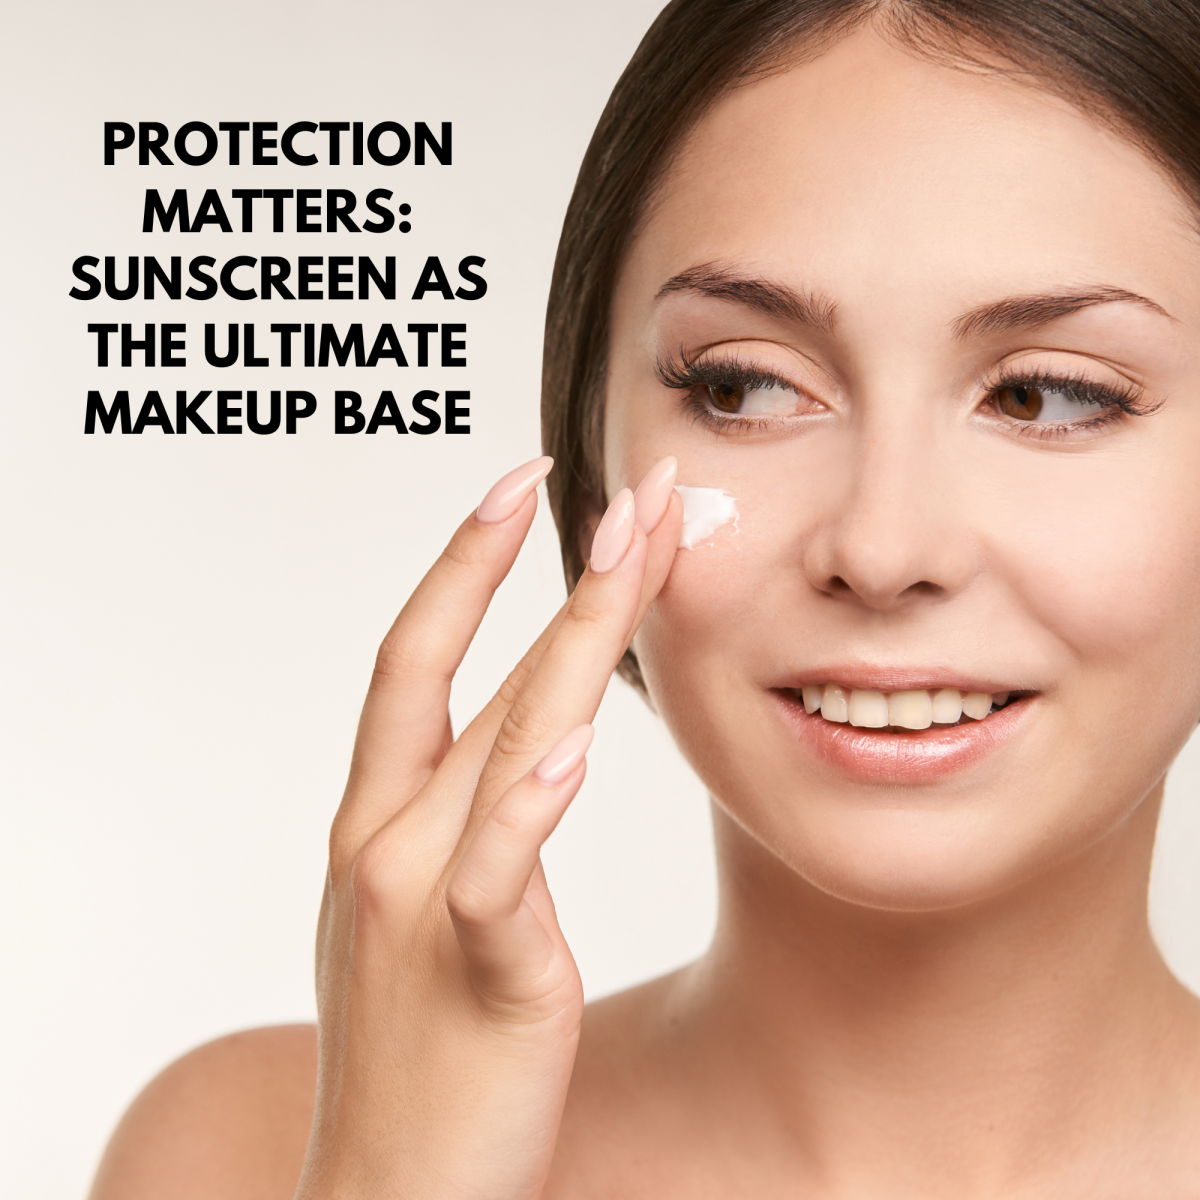 Protection Matters: Sunscreen as the Ultimate Makeup Base